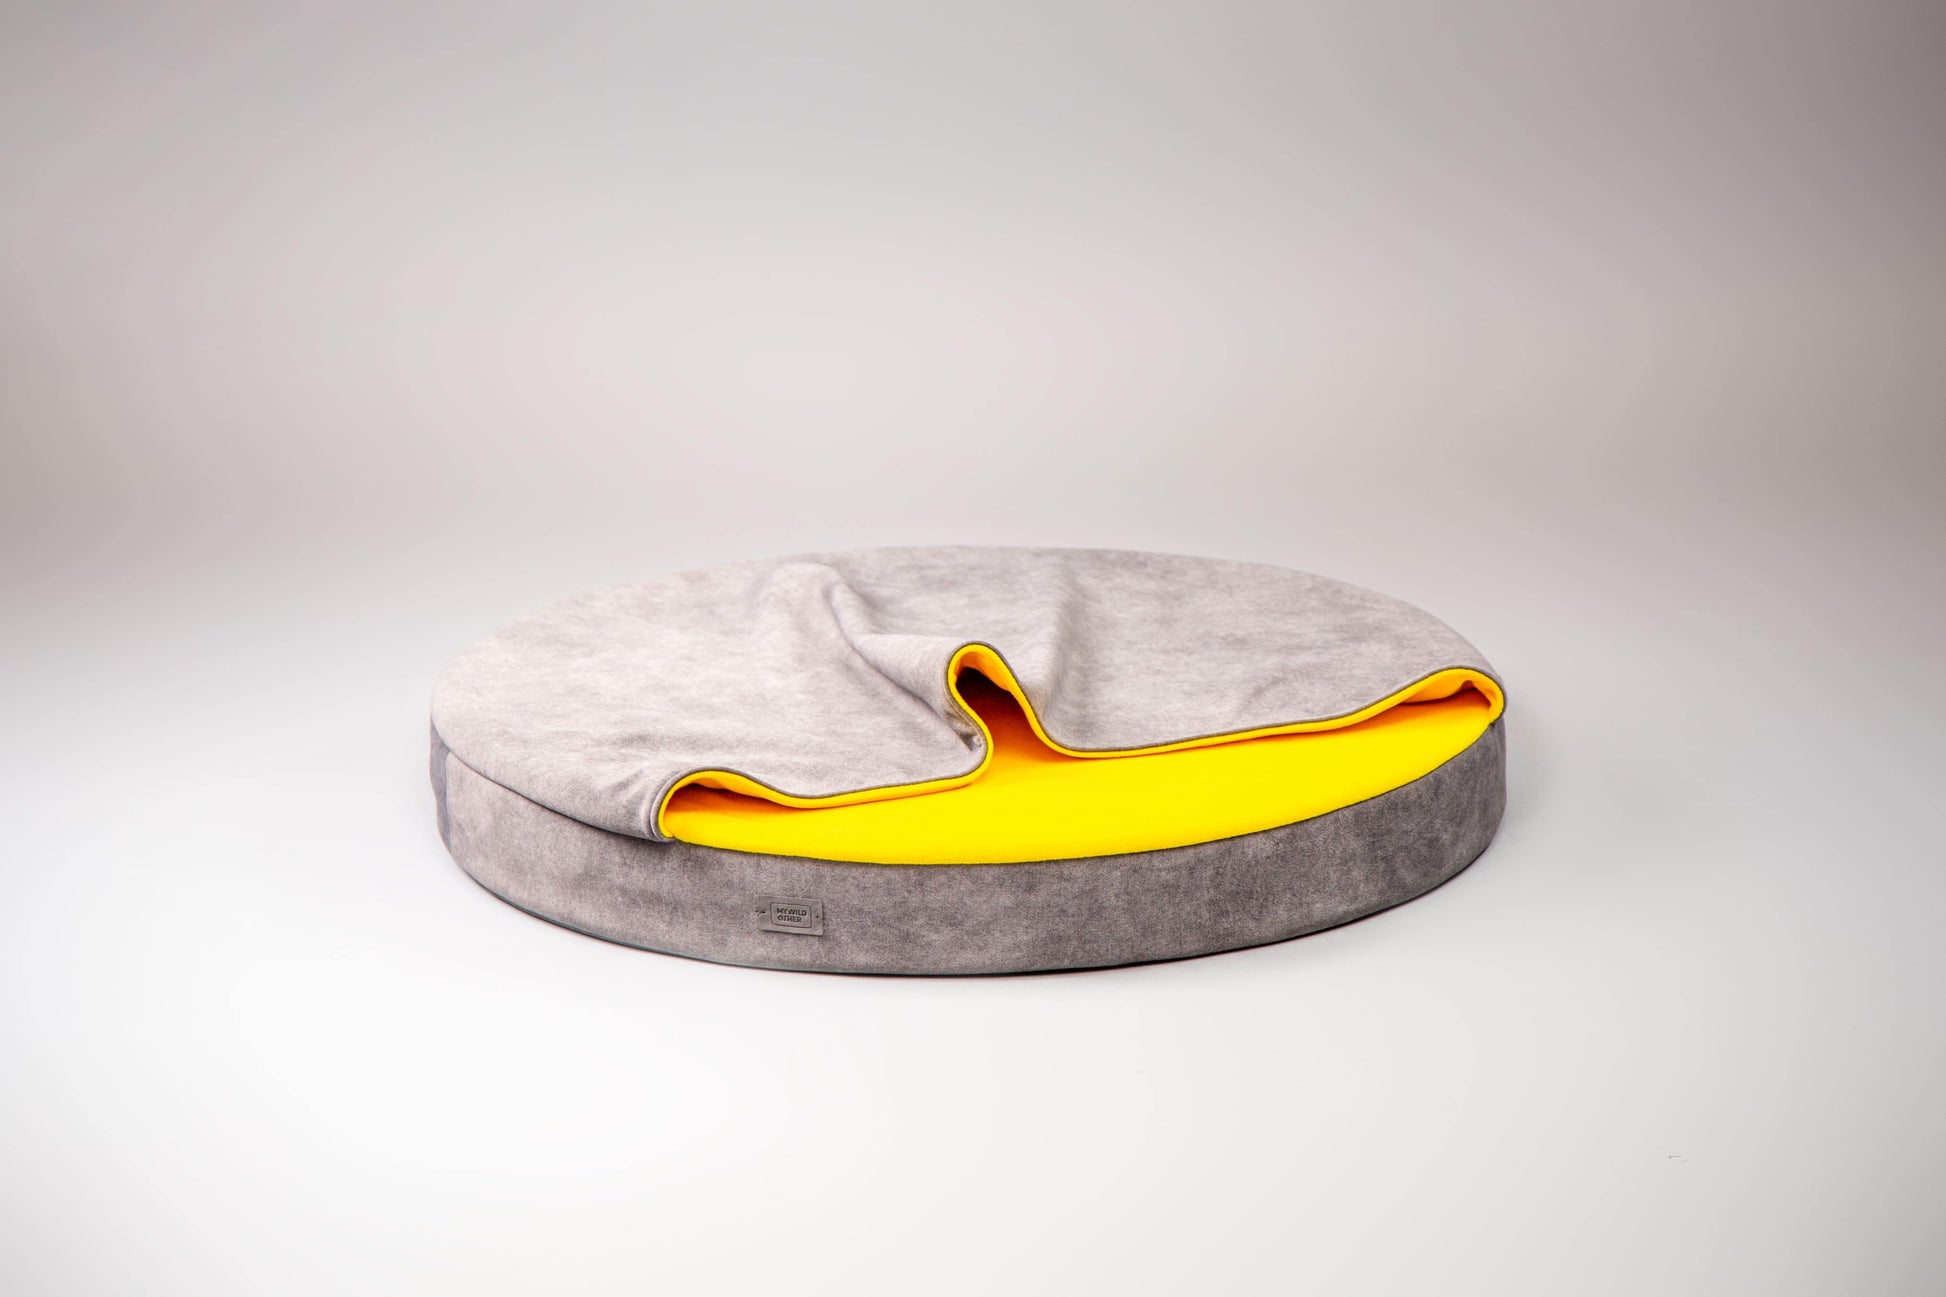 Cozy cave dog bed. STEEL GREY+YELLOW - European handmade dog accessories by My Wild Other